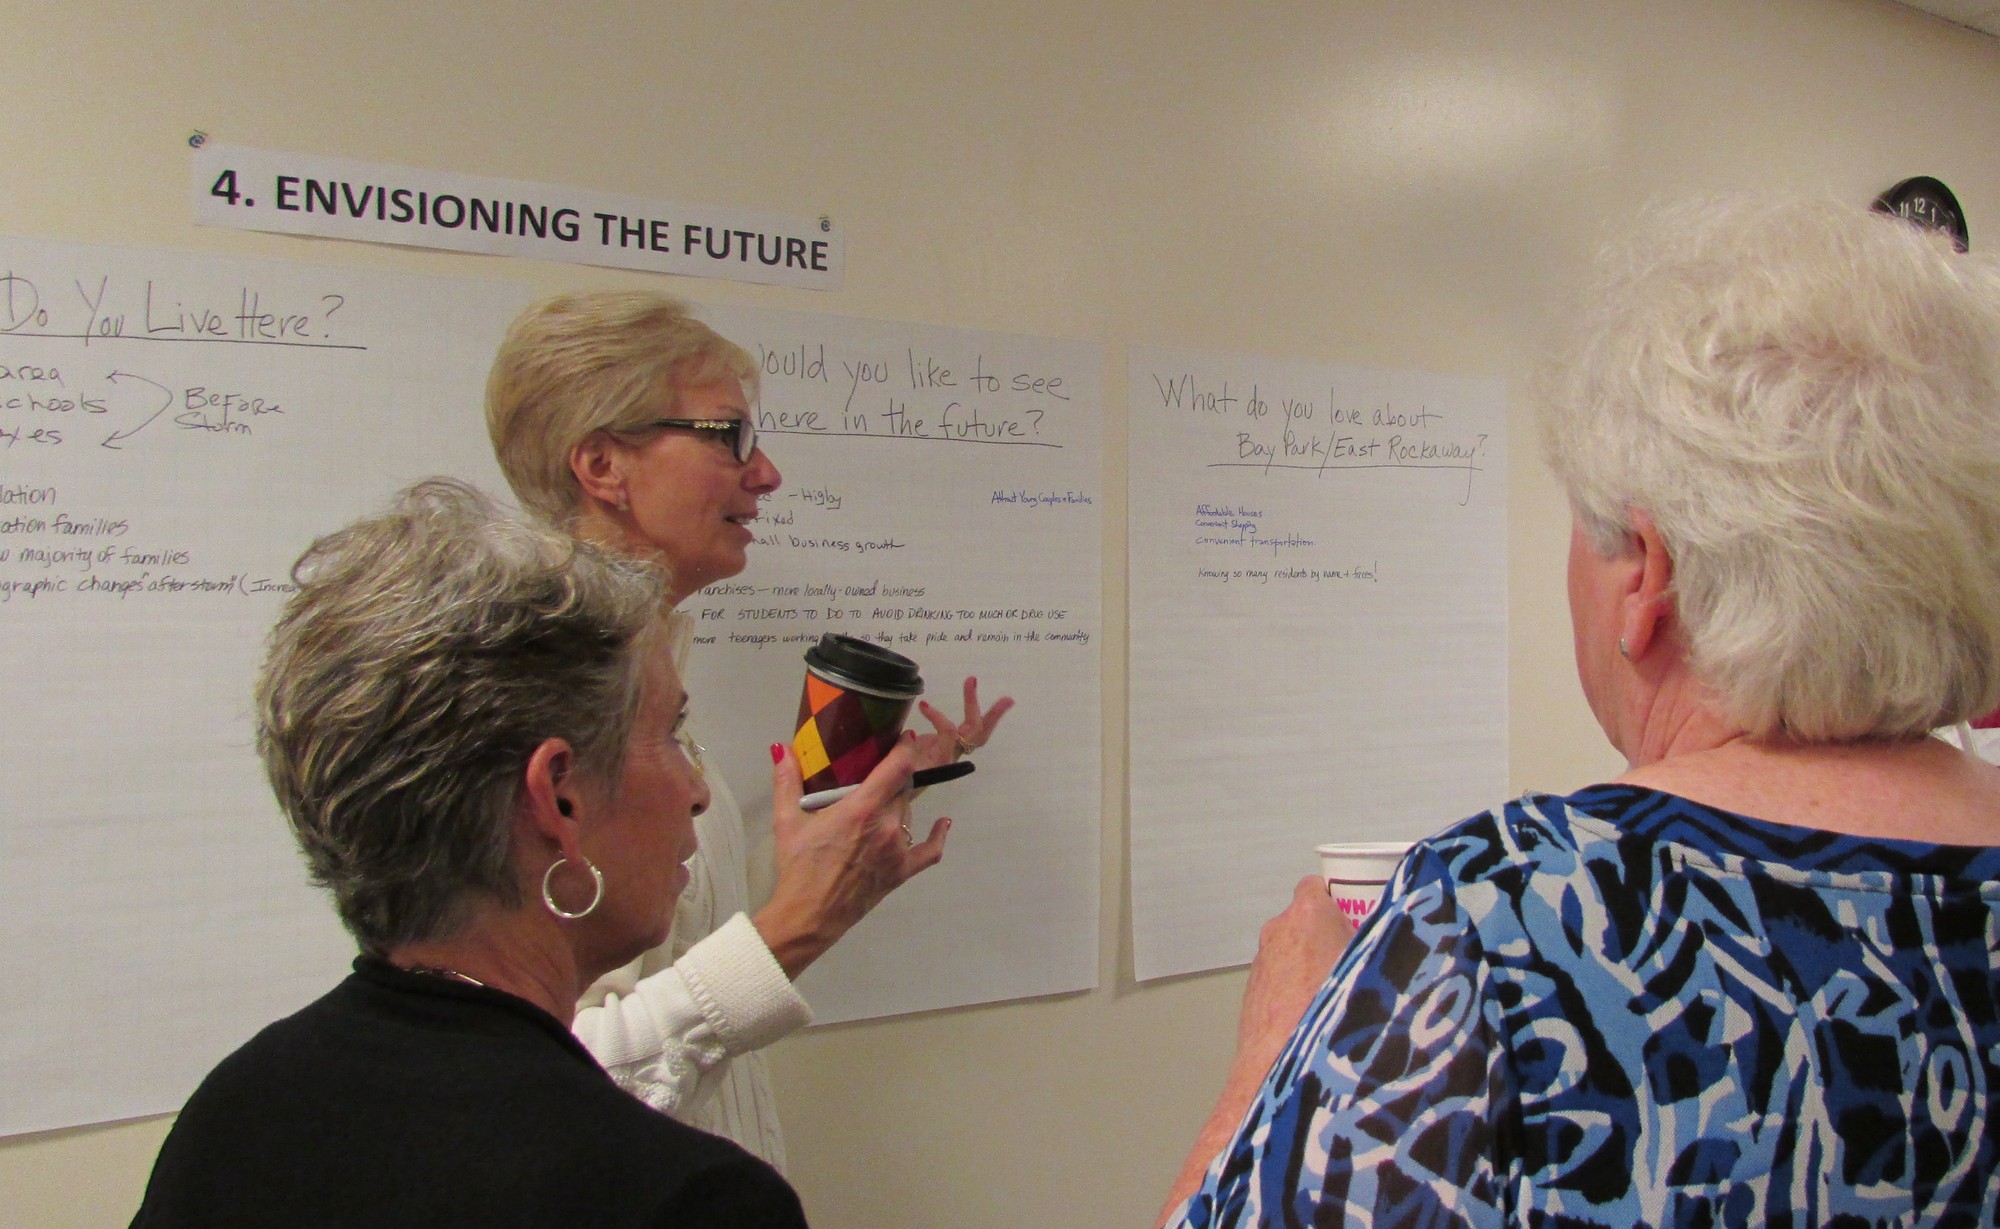 Residents were able to stop at the "stations" to get information and give their input.